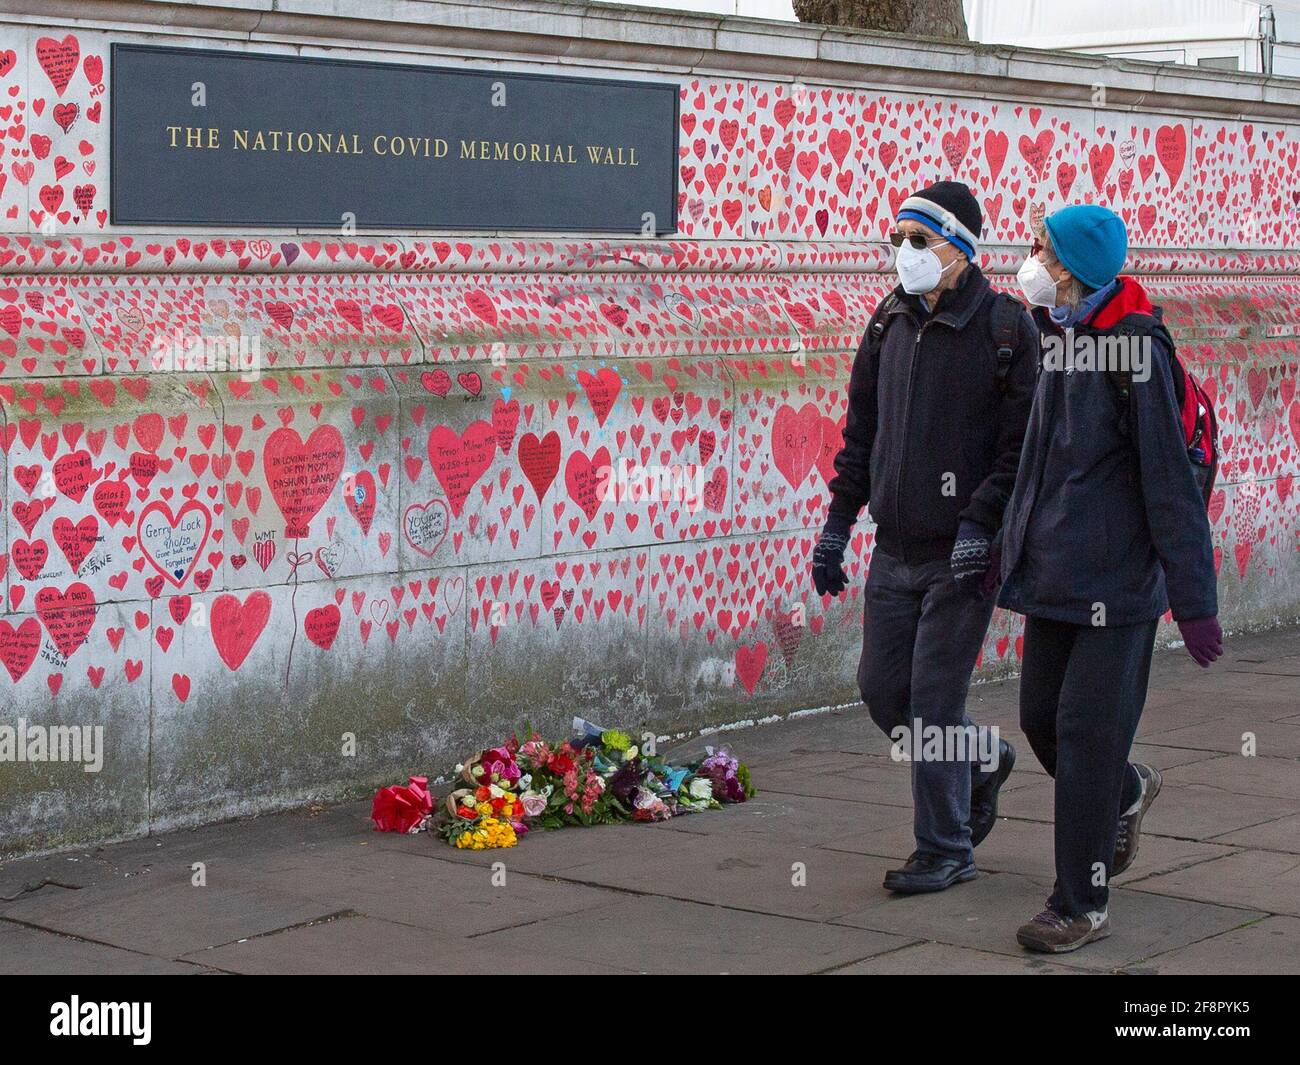 People walk past and write on the national Covid memorial wall, in London on the 9th of April 2021 Stock Photo